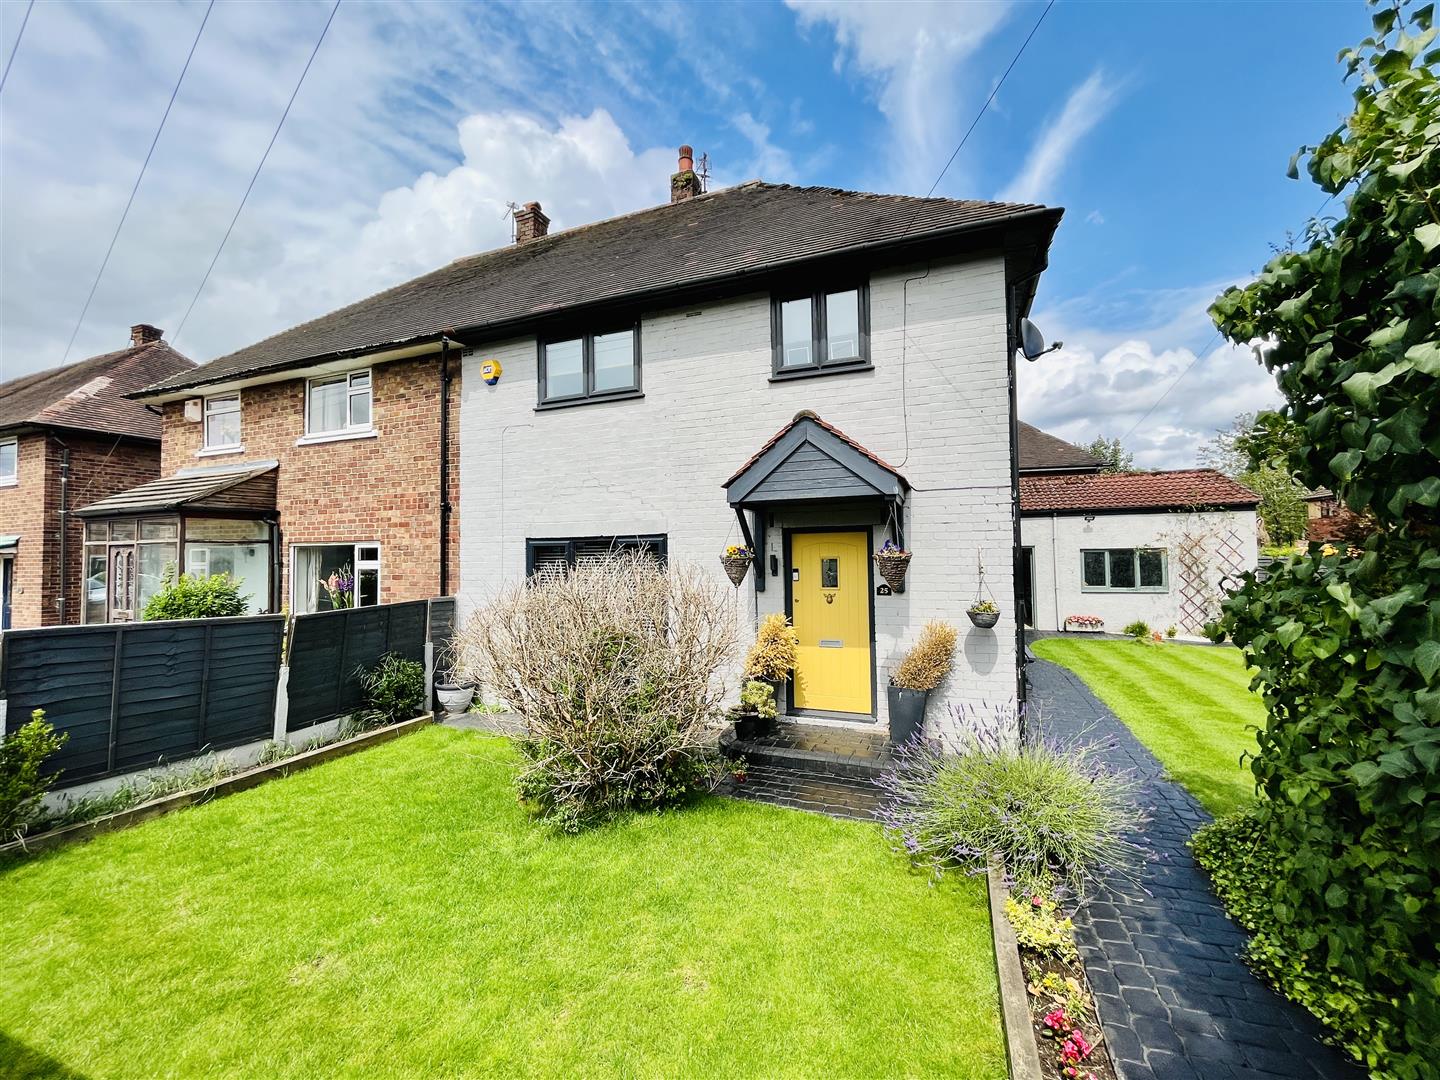 3 bed semi-detached house for sale in Fairywell Road, Altrincham - Property Image 1